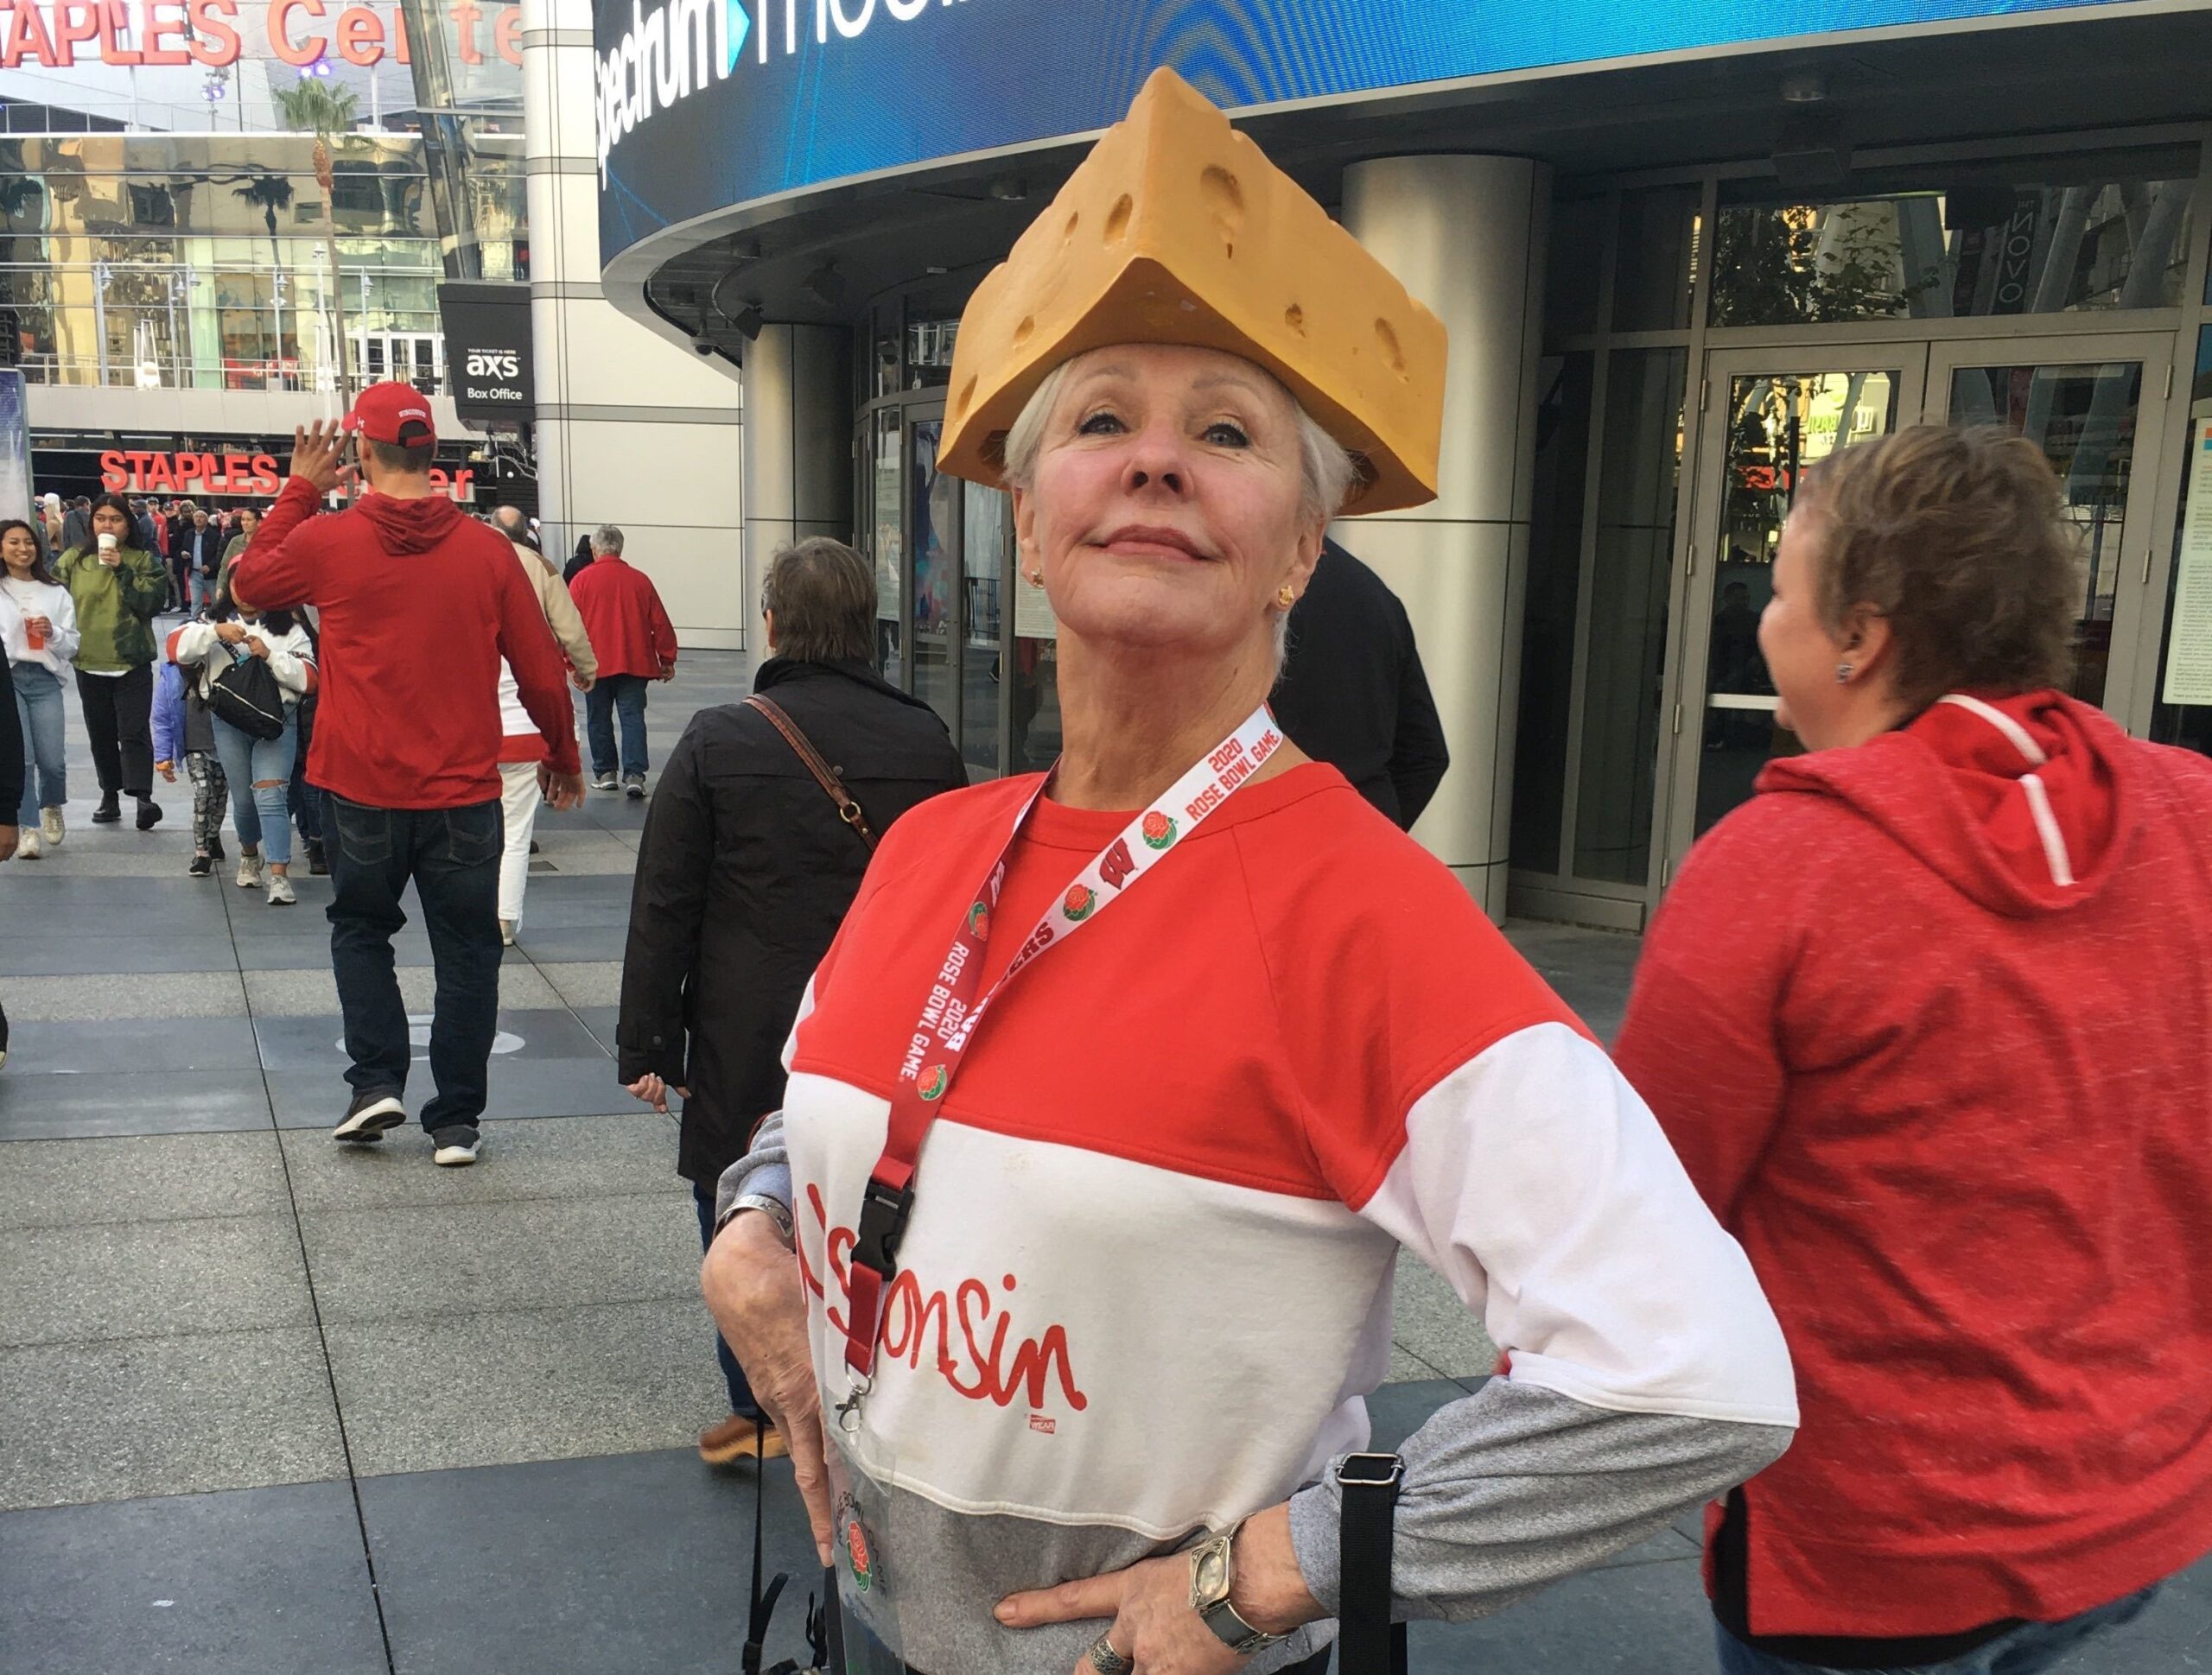 Badgers fan poses with cheesehead outside pep rally